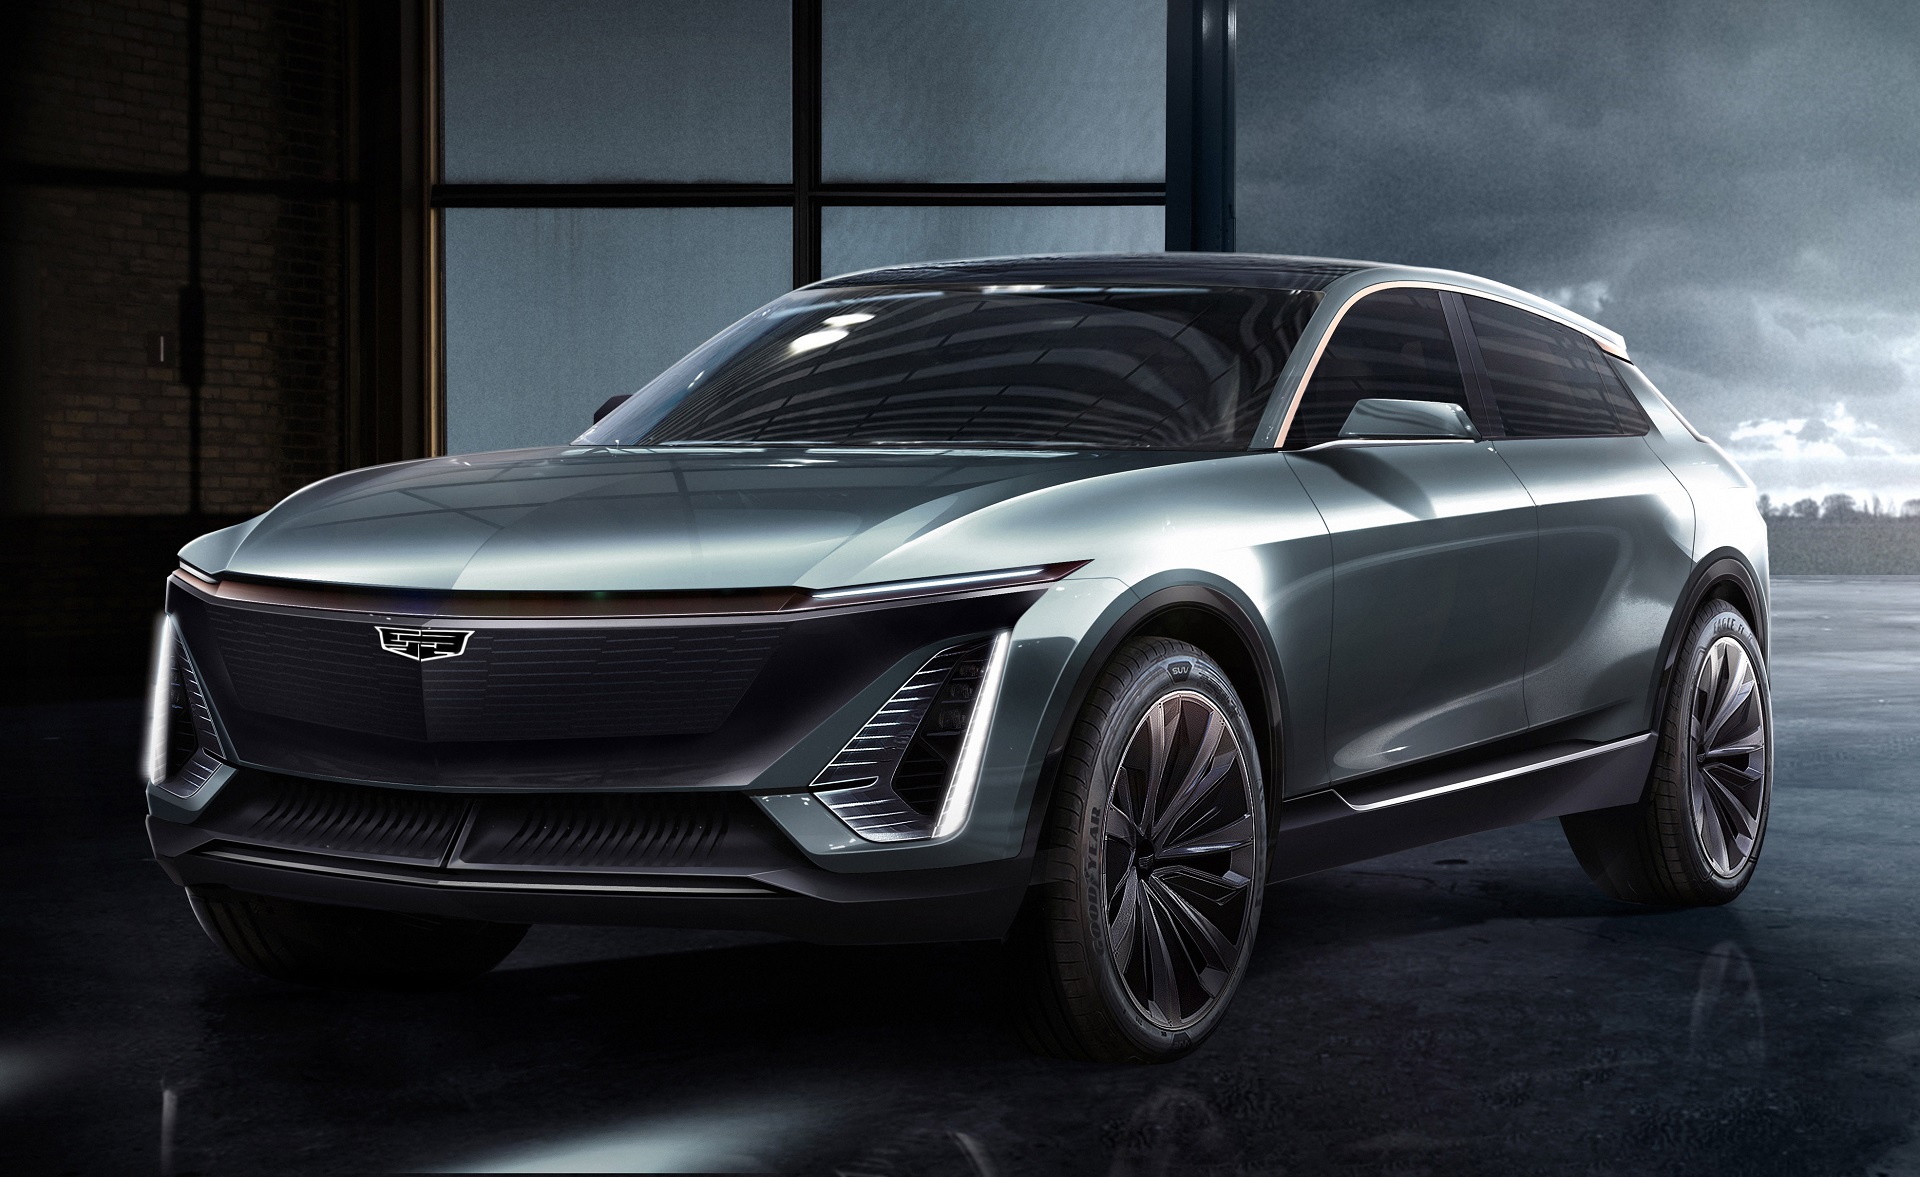 Cadillac furthered its recent product blitz today with the revea